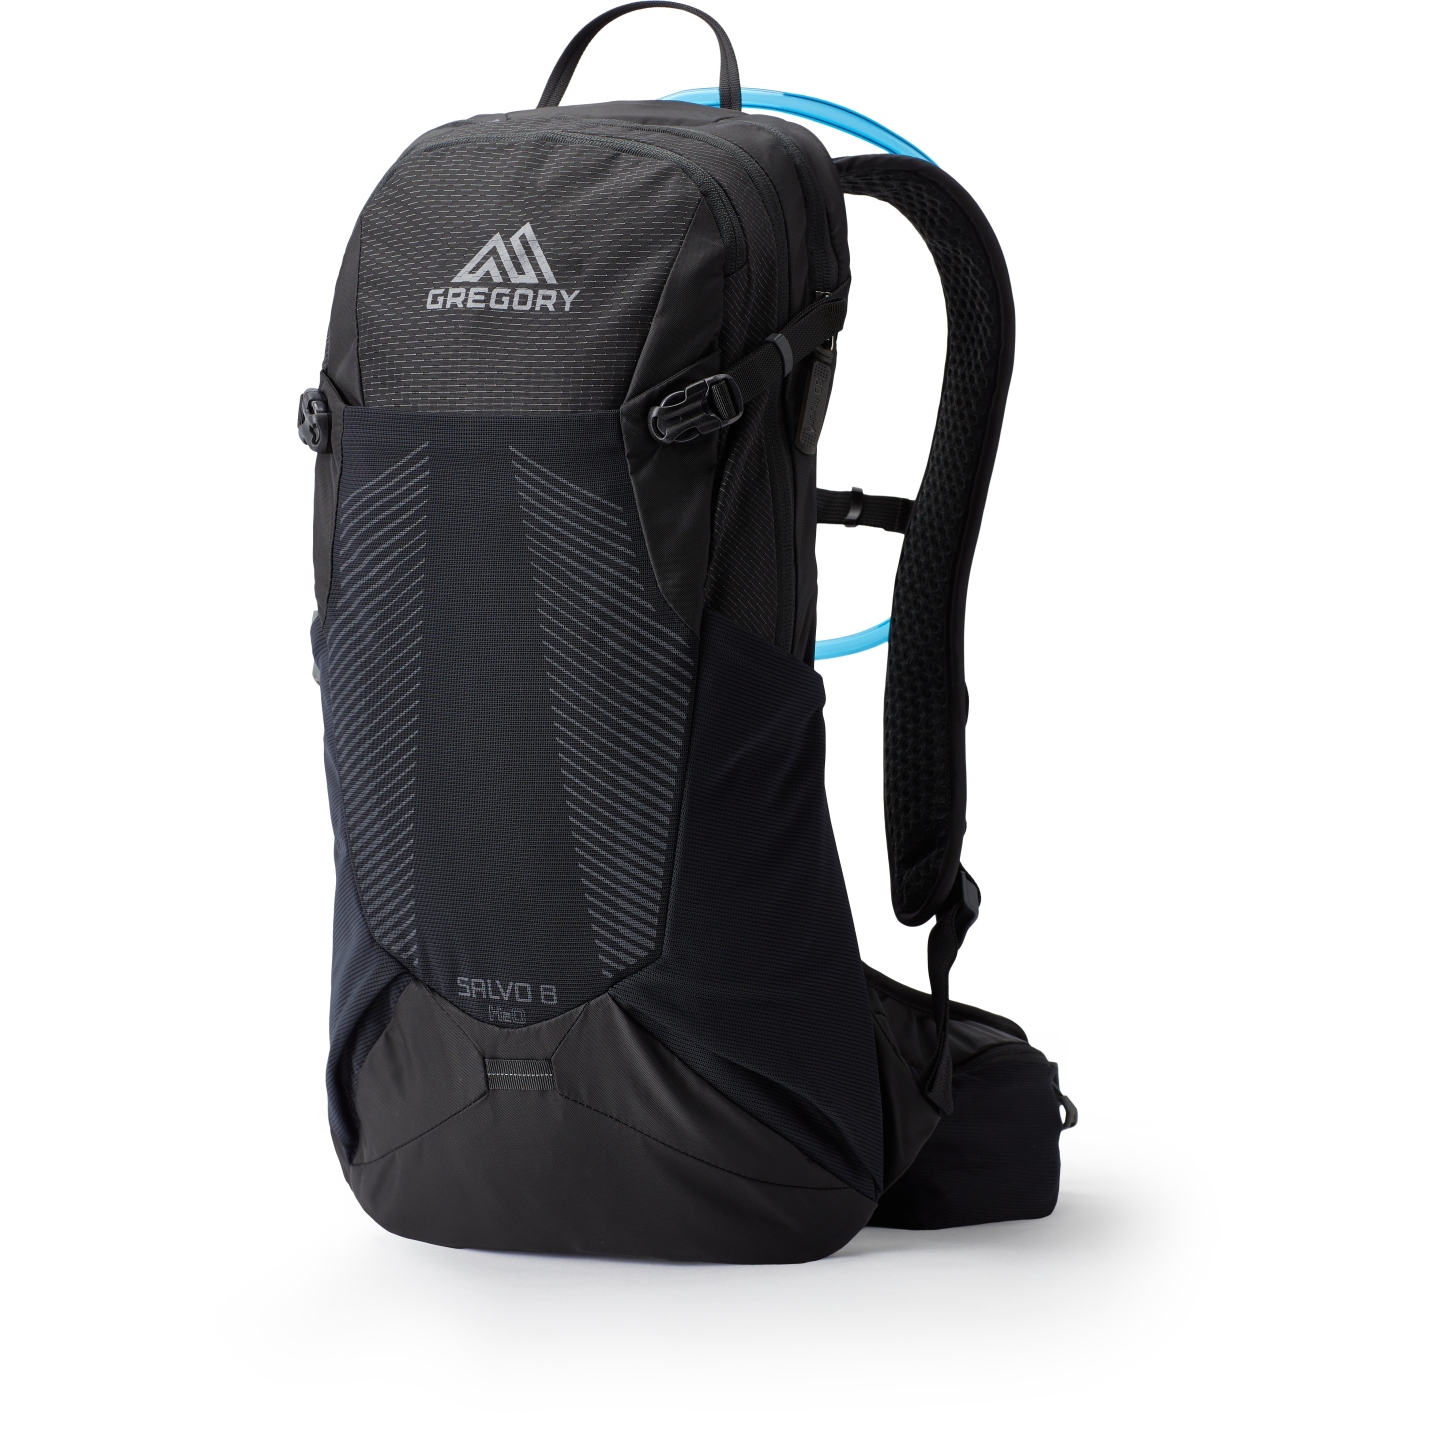 Picture of Gregory Salvo 8 H2O Backpack - Ozone Black